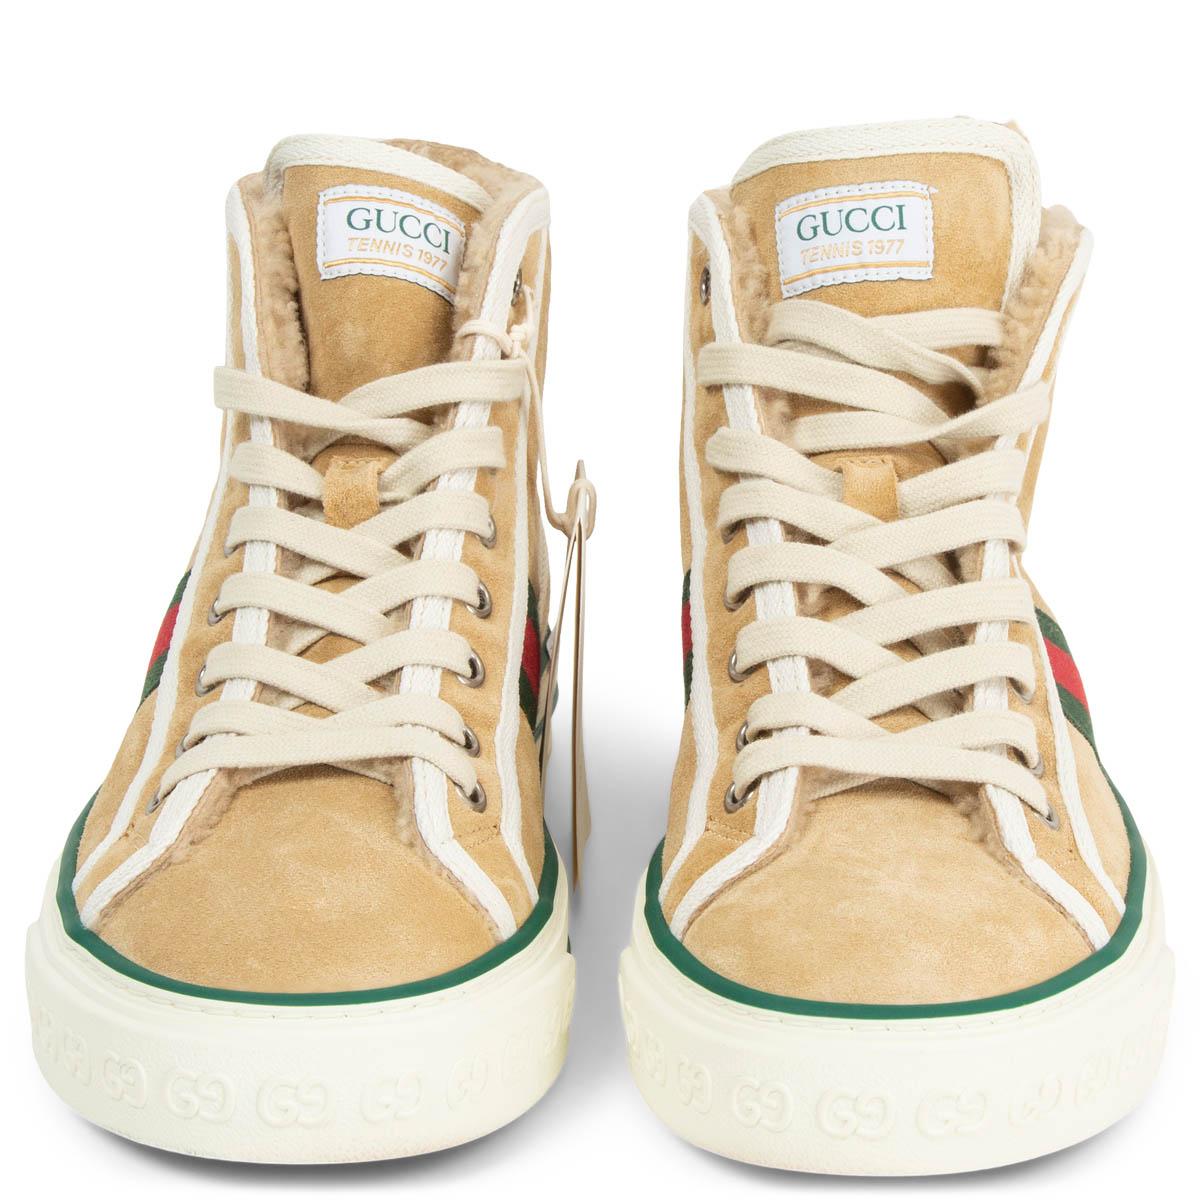 100% authentic Gucci Tennis 1977 high-top sneakers in beige suede with signature web stripe in green and red on the side. White rubber sole and fully lined in beige soft shearling. Brand new. Come with dust bags and extra laces.